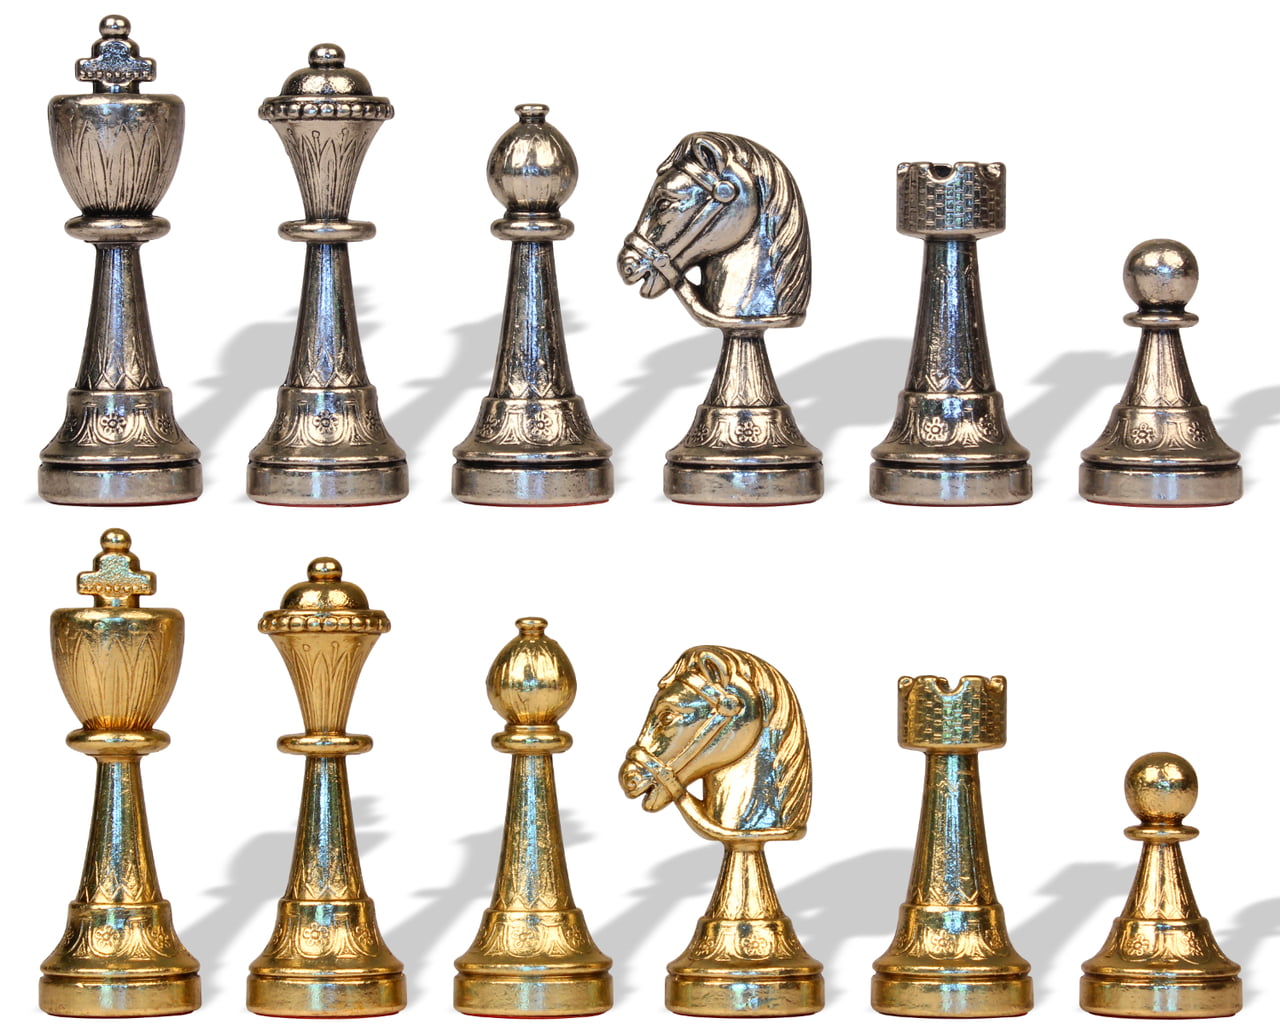 40pcs Board Game Pieces Wooden Flight Chess Chessman Tabletop Game